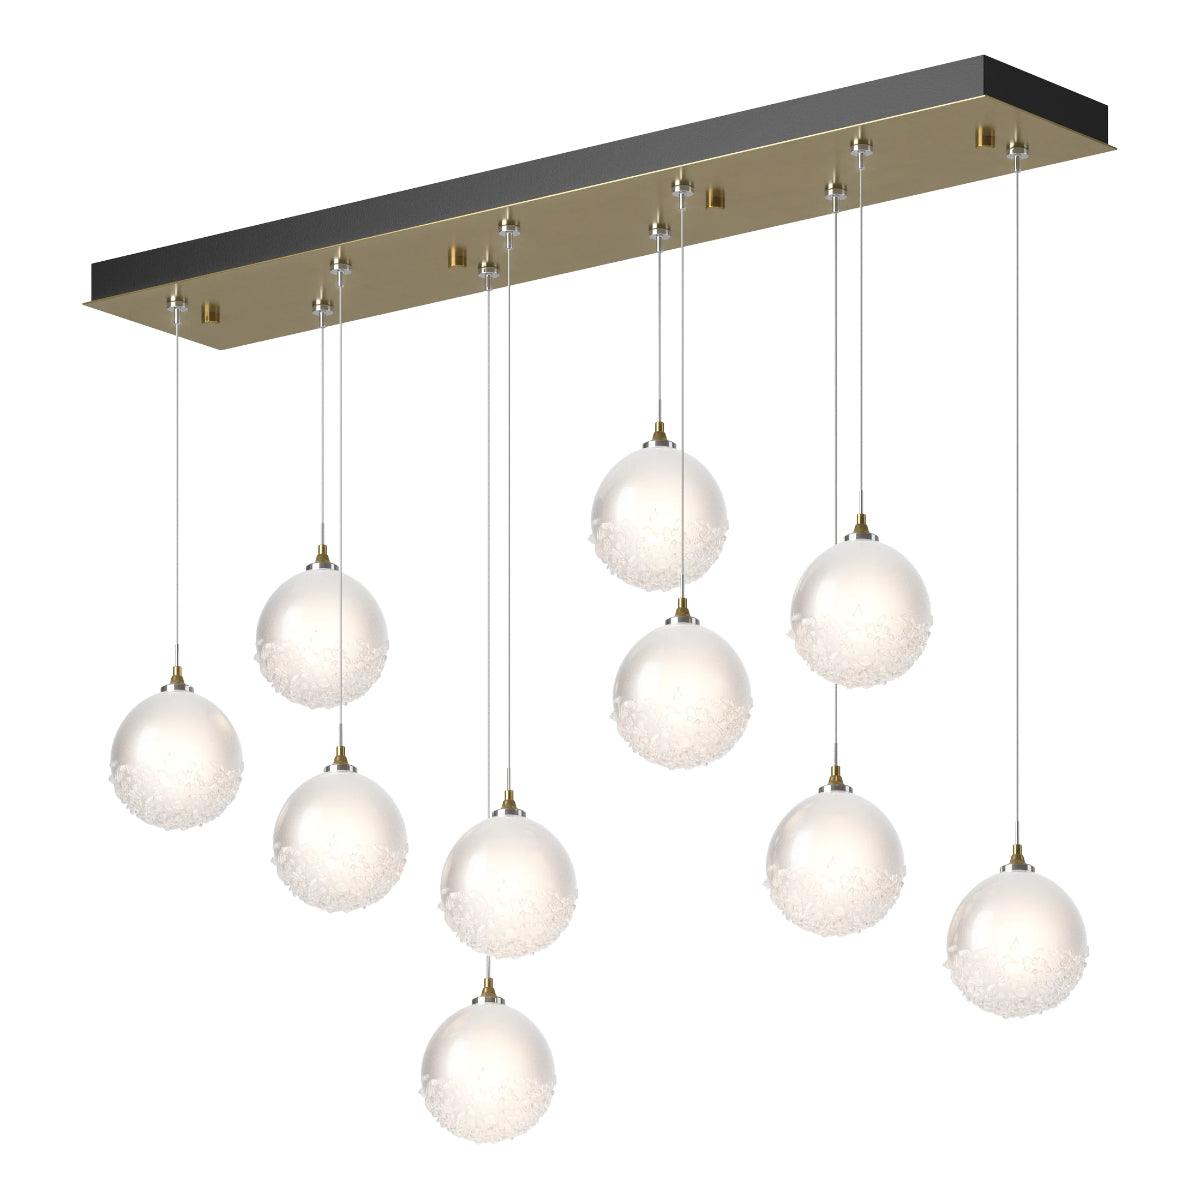 Fritz 45 in. 10 lights Linear Pendant Light with Long Height